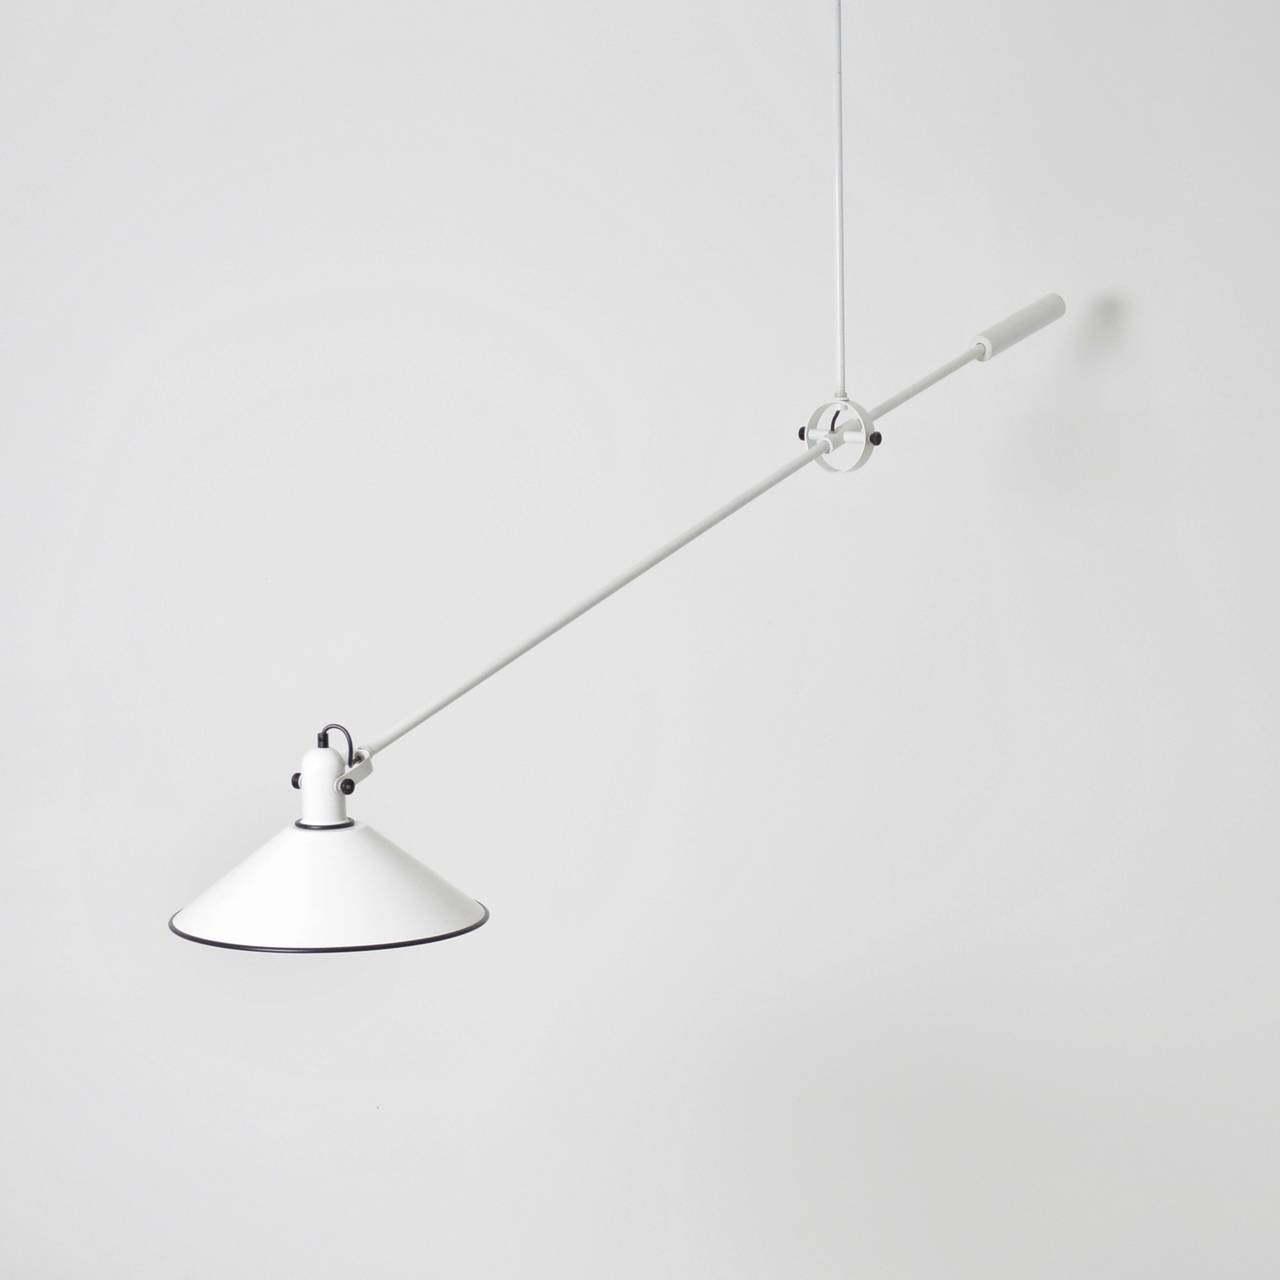 A sculptural counterbalanced ceiling lamp by one of the most respected Dutch lighting designers of the era, JJM Hoogervorst, principle designer for ANVIA, Holland. The weighted arm holds the position of the lamp. It is in excellent condition with